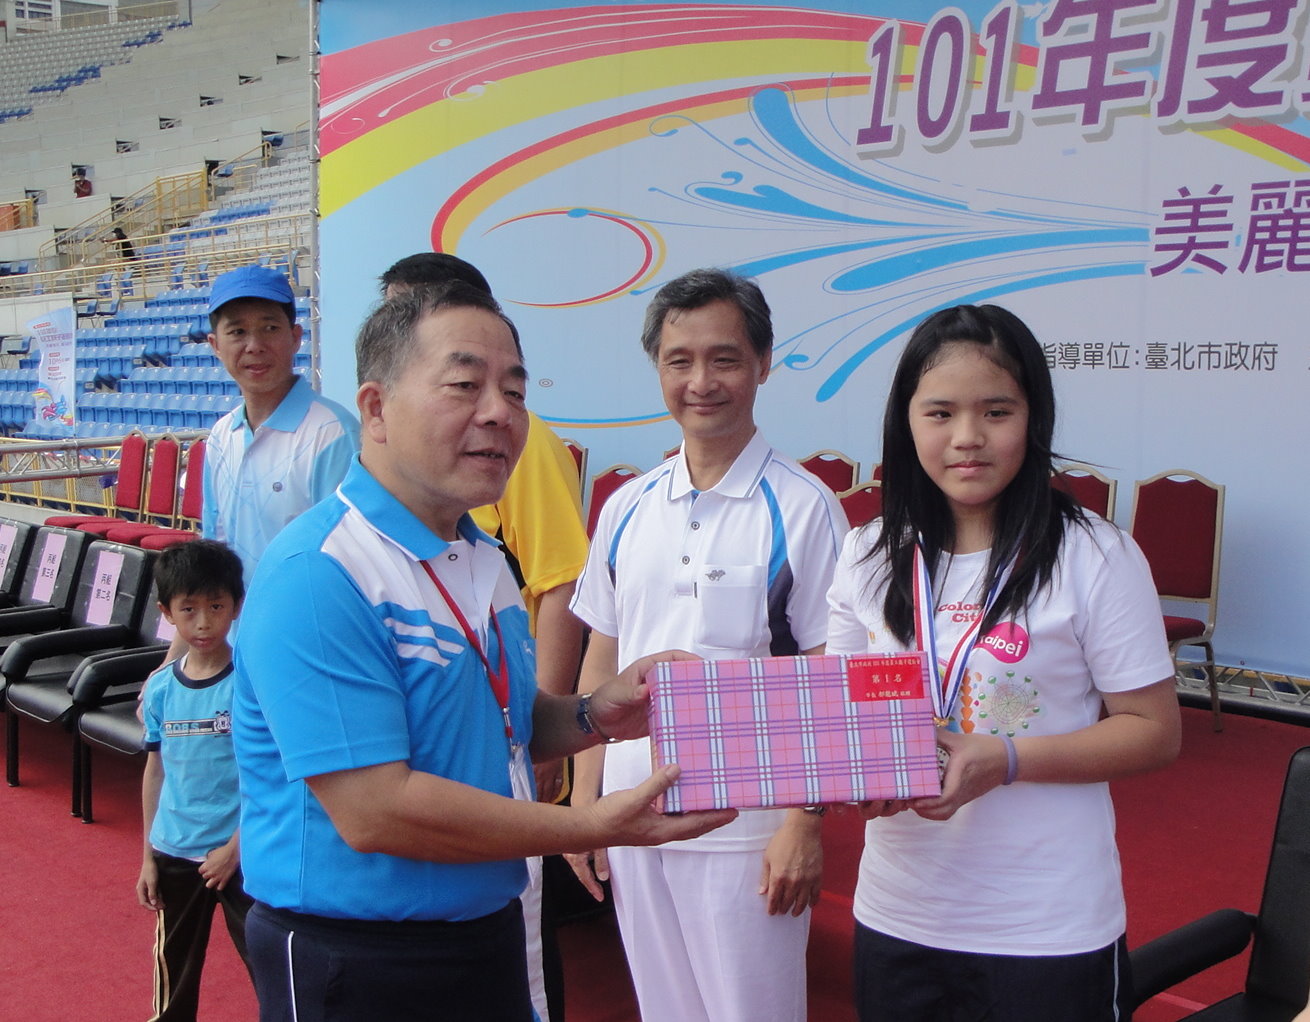 The athletes gave an outstanding performance, and were awarded Fun Competitions Group A Champion.